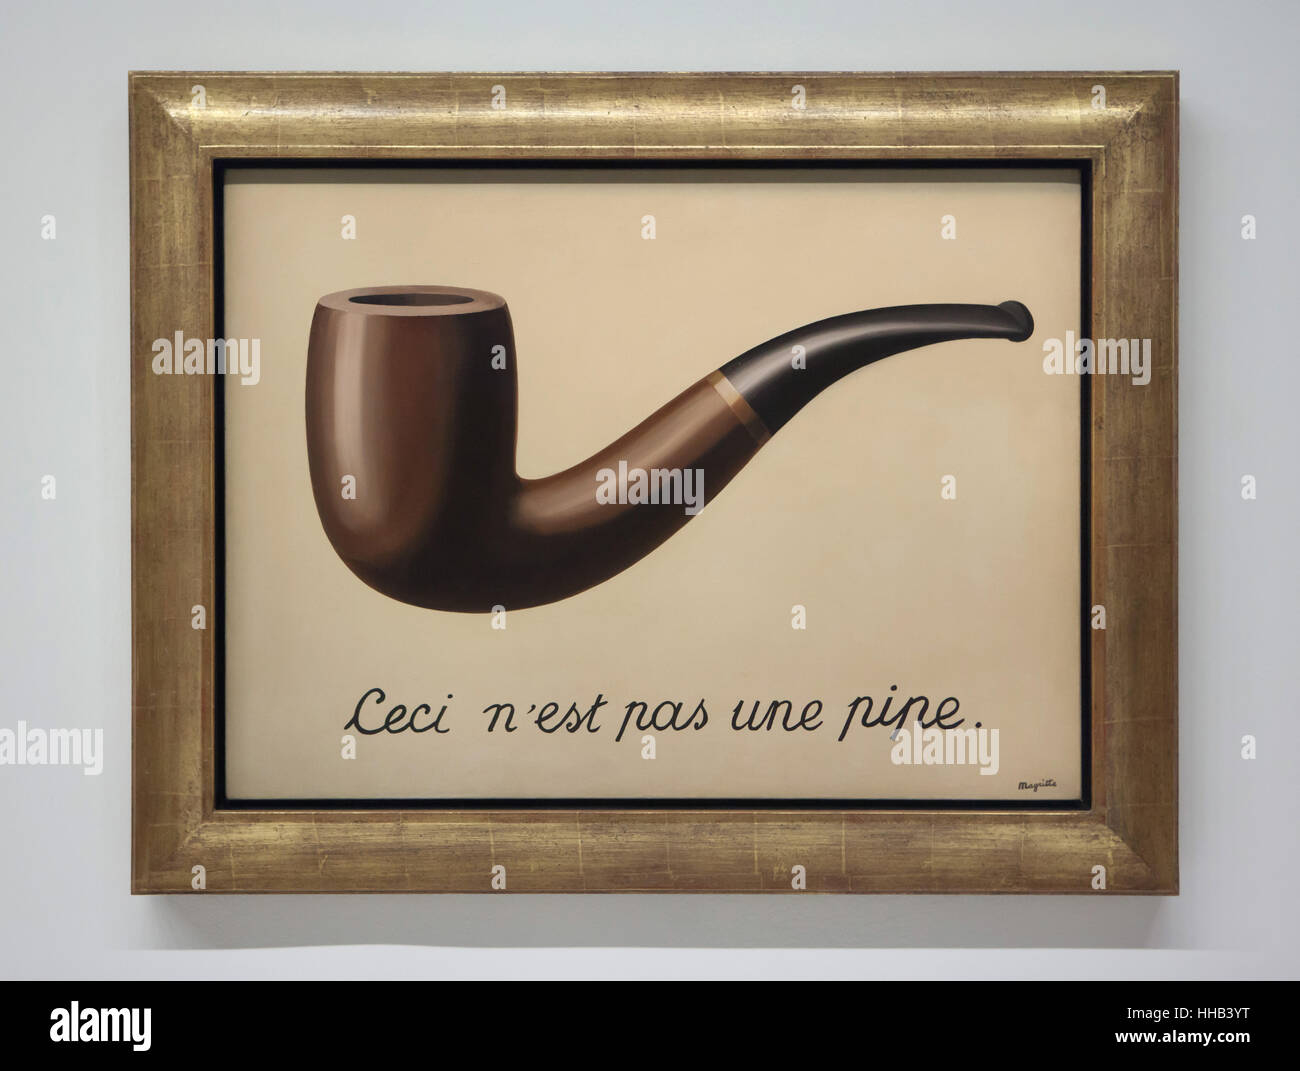 Painting 'La trahison des images' ('The Treachery of Images') by Belgian surrealist artist Rene Magritte (1929) on display at his retrospective exhibition in the Centre Pompidou in Paris, France. The French inscription 'Ceci n'est pas une pipe' means 'This is not a pipe'. The exhibition entitled 'Rene Magritte. The Treachery of Images' runs till 23 January 2017. After that the reformulated version of the exhibition will be presented at the Schirn Kunsthalle in Frankfurt am Main, Germany, from 10 February to 5 June 2017. Stock Photo